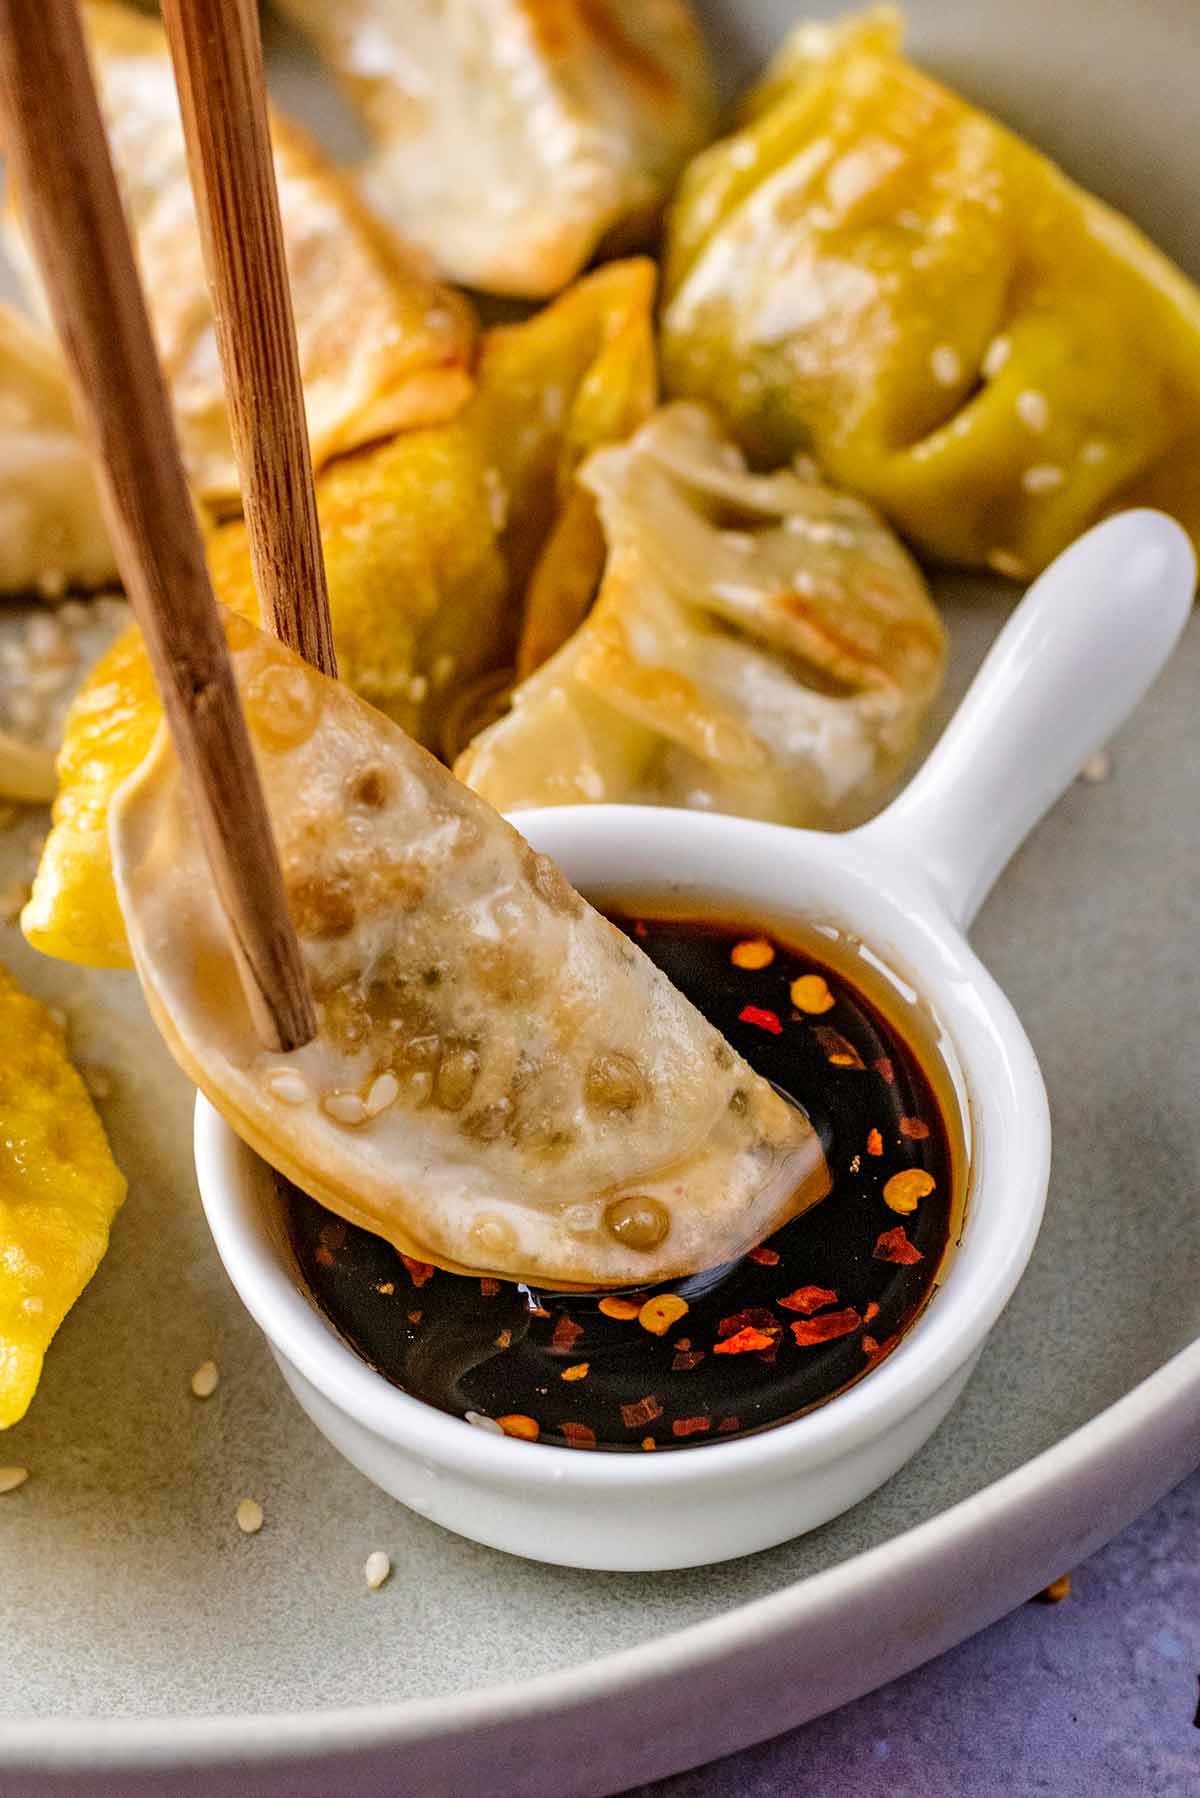 A fried gyoza being dipped into a small dish of sauce.